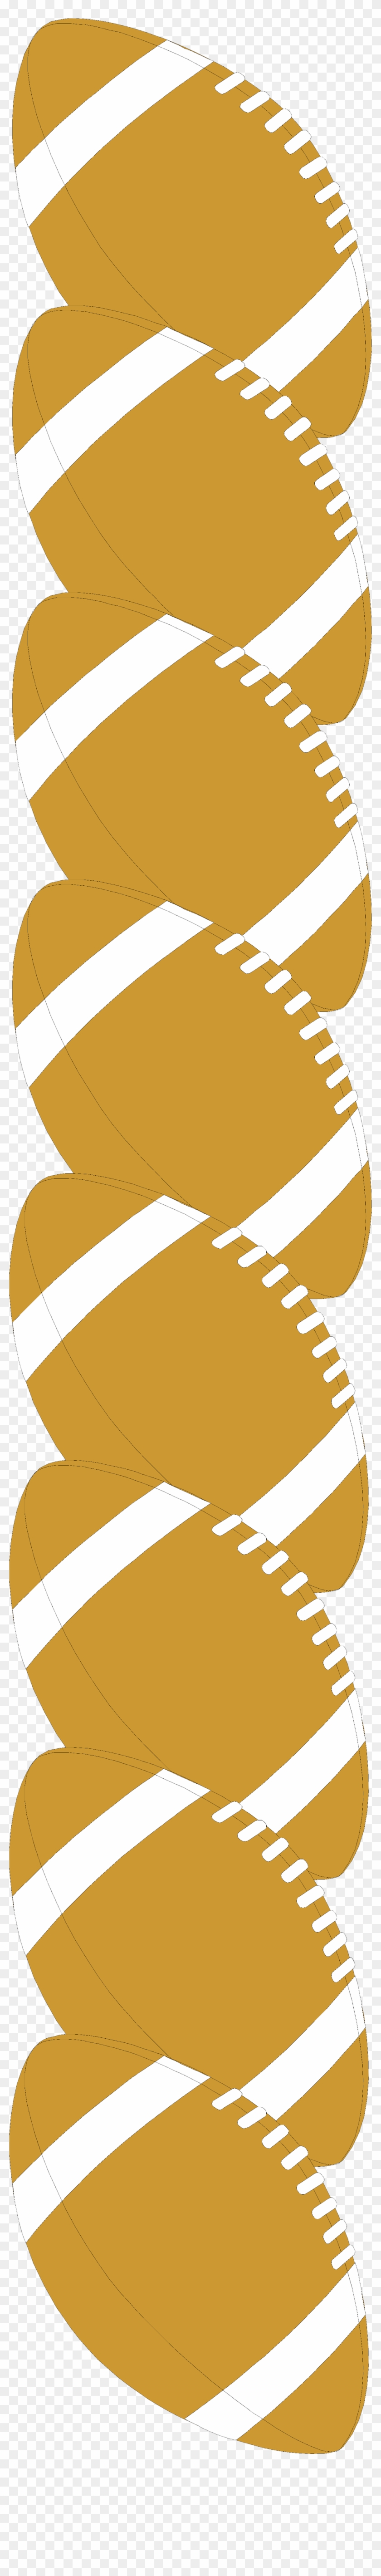 Clip Arts Related To - Free Clipart Football Border #255108